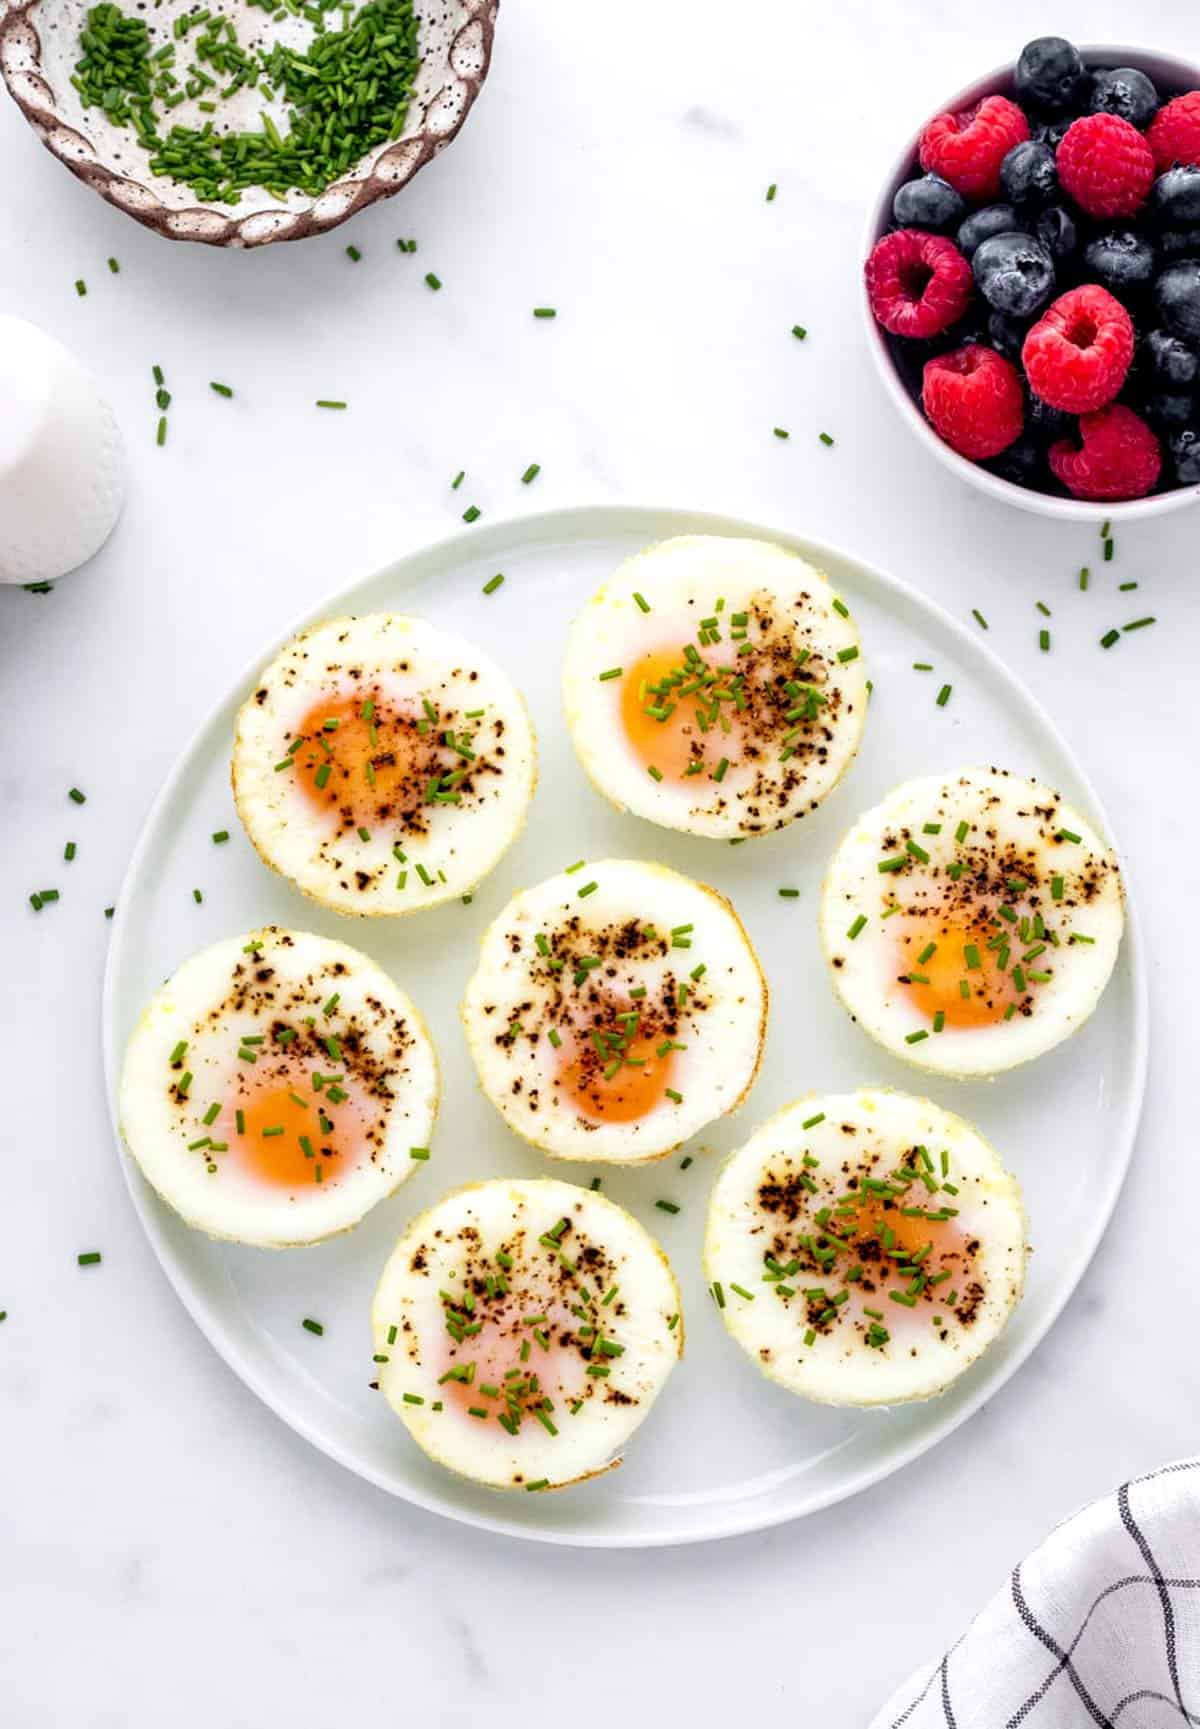 Oven baked eggs on a plate sprinkled with chives.